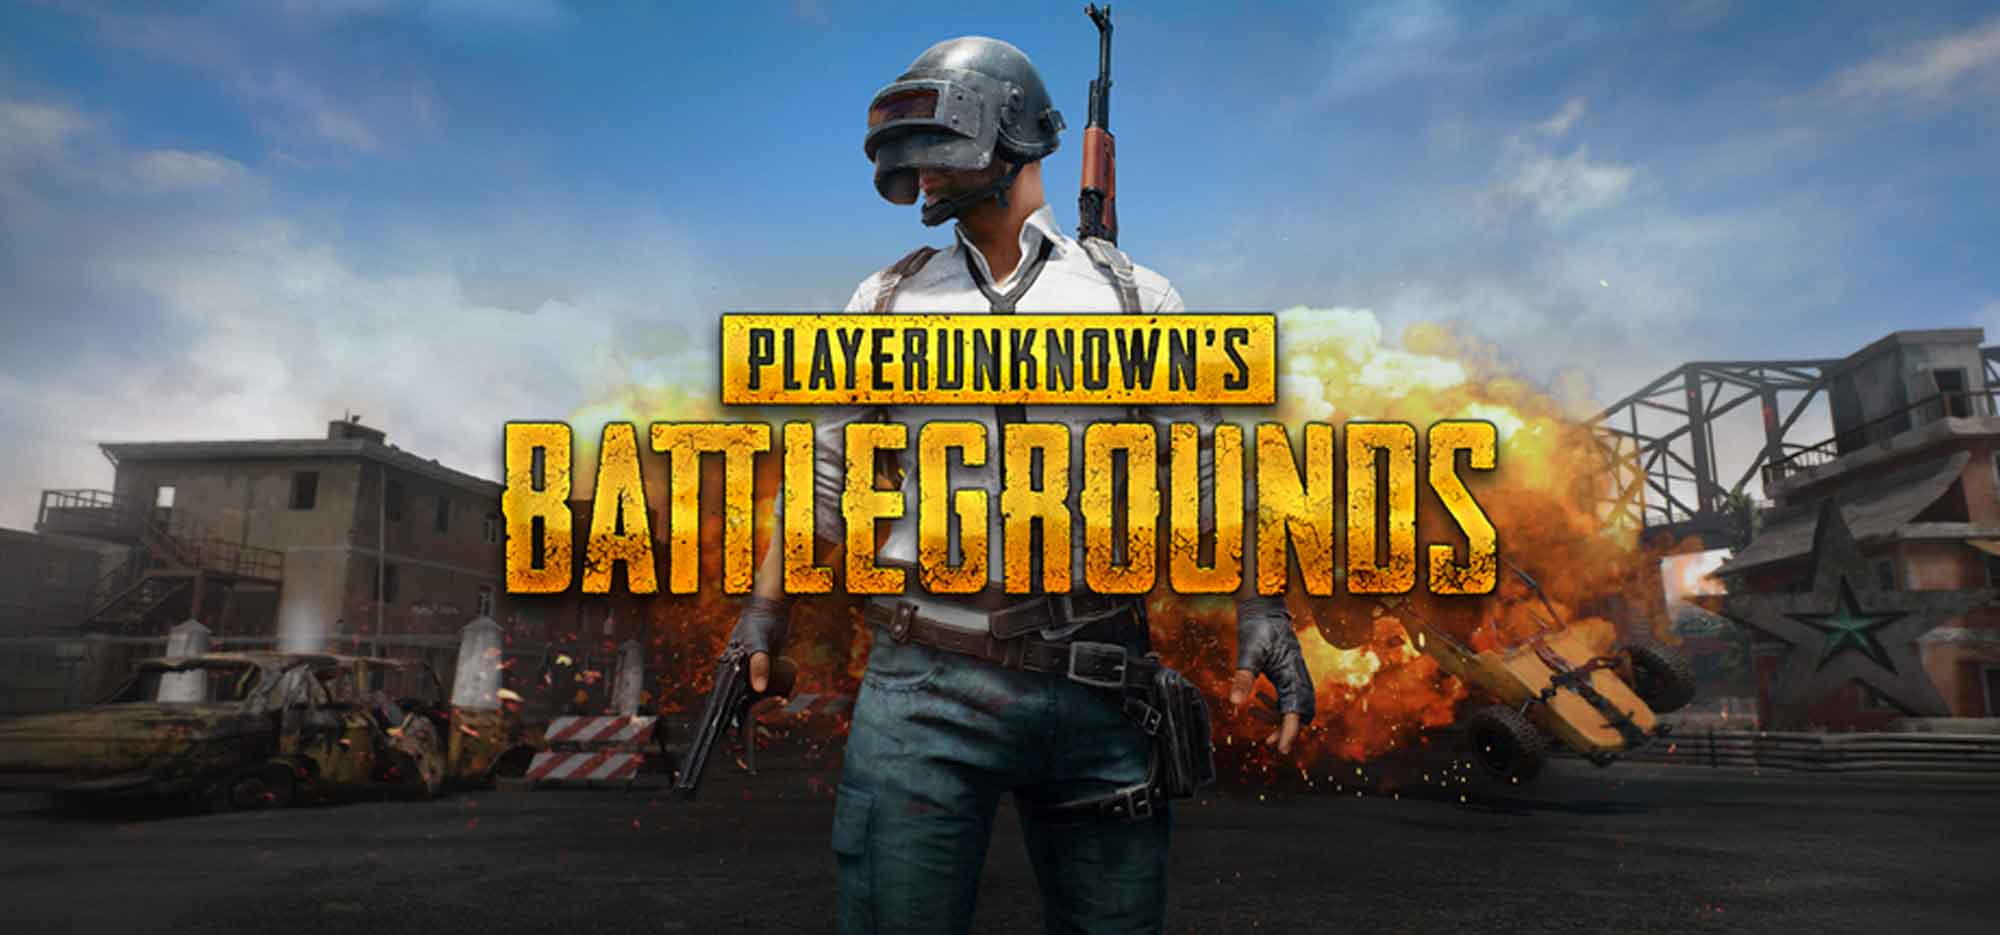 8 Interesting Facts About PUBG That All Gamers Should Know